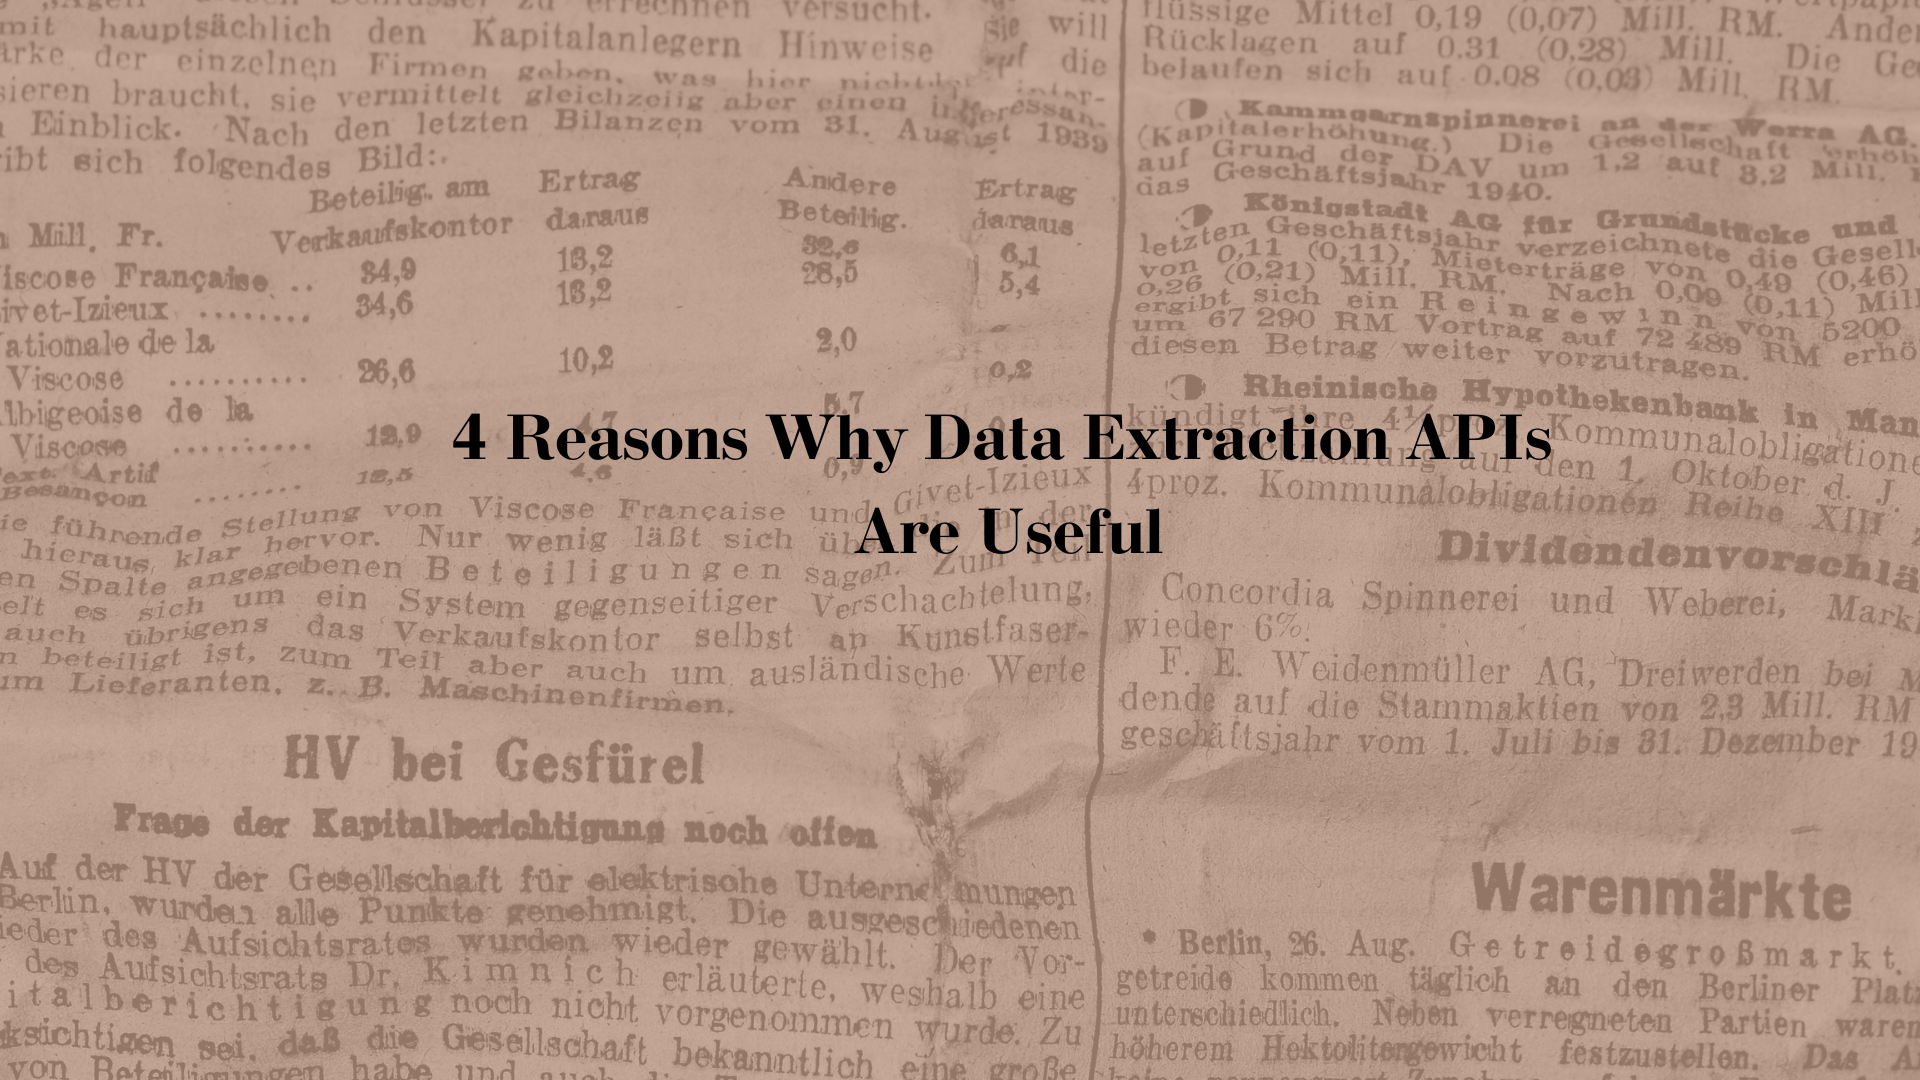 4 Reasons Why Data Extraction APIs Are Useful